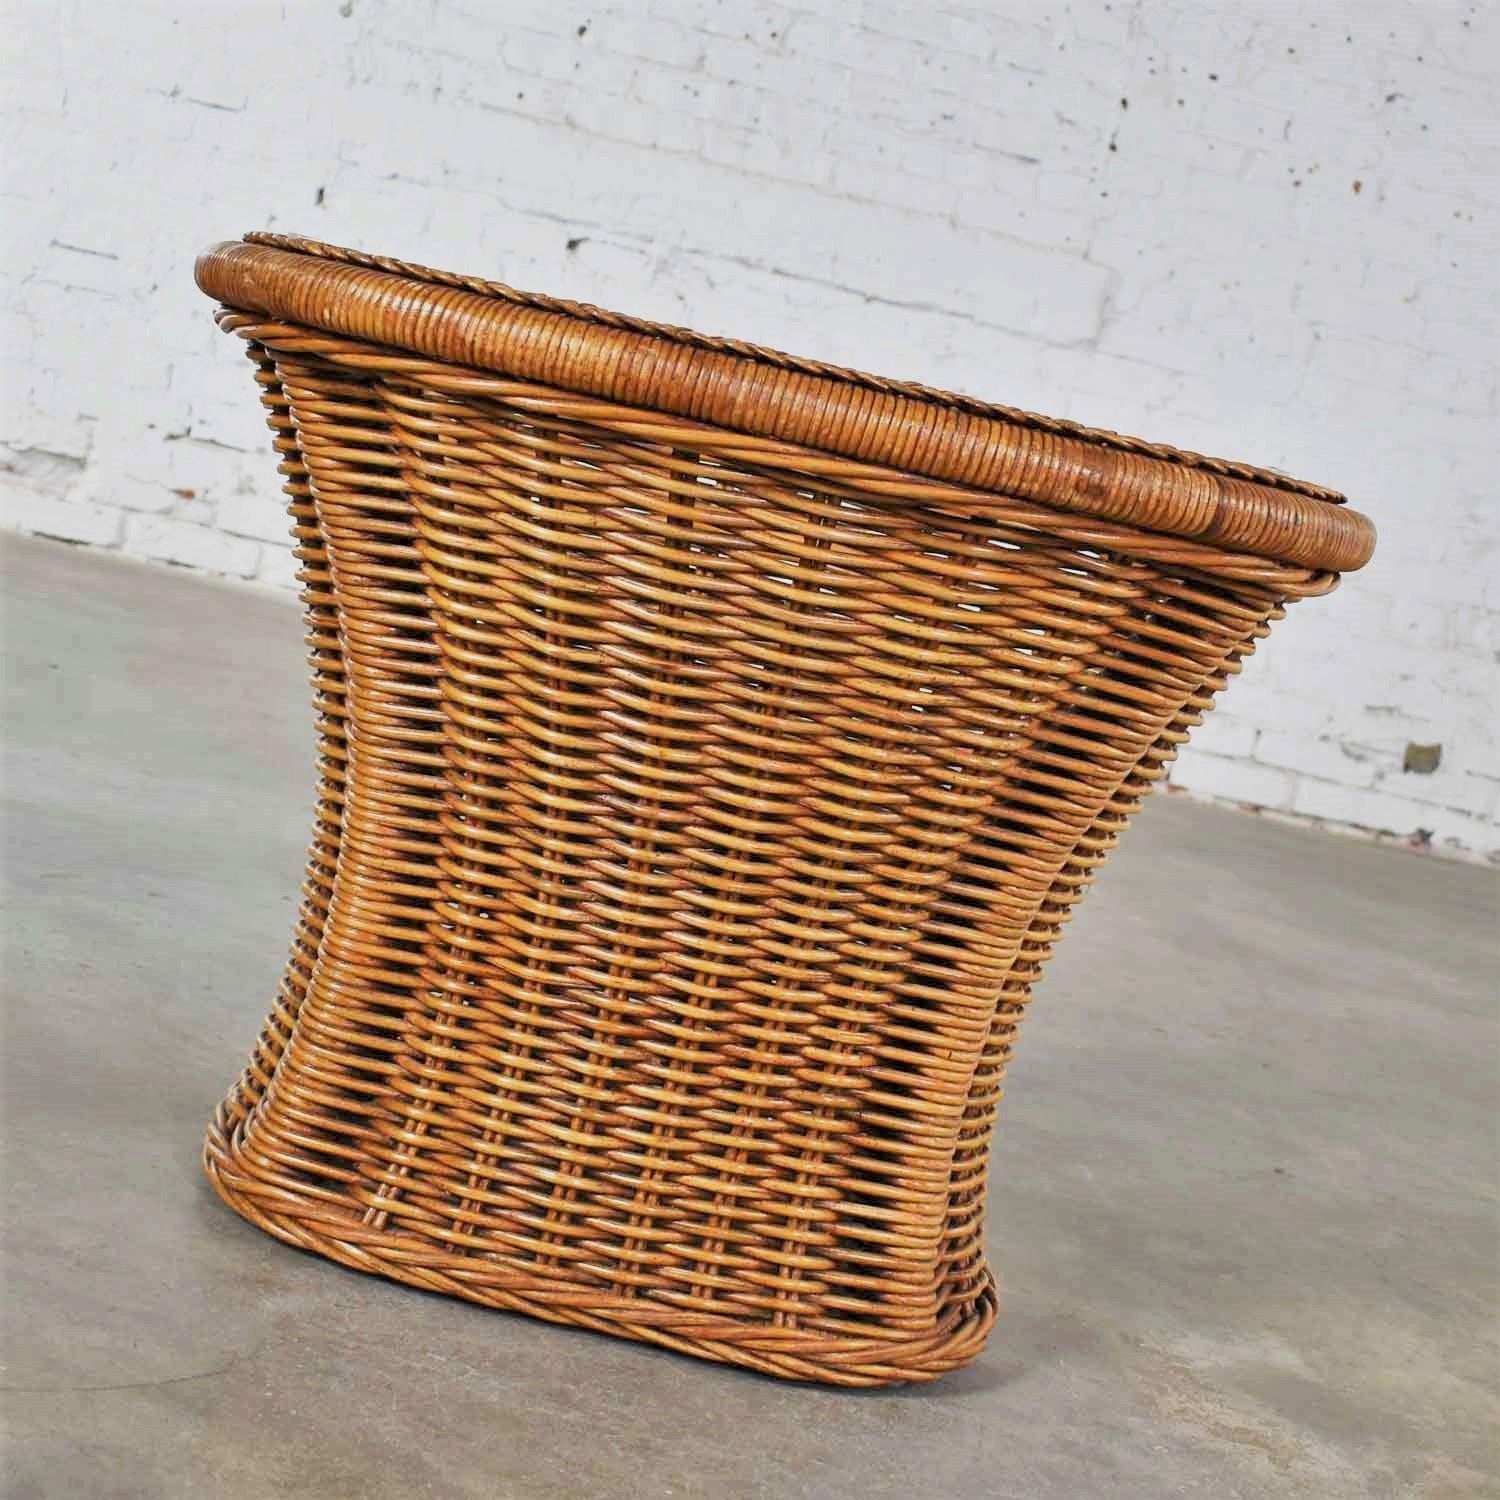 Organic Modern Woven Wicker Rattan Side or End Table with Rectangular Glass For Sale 4